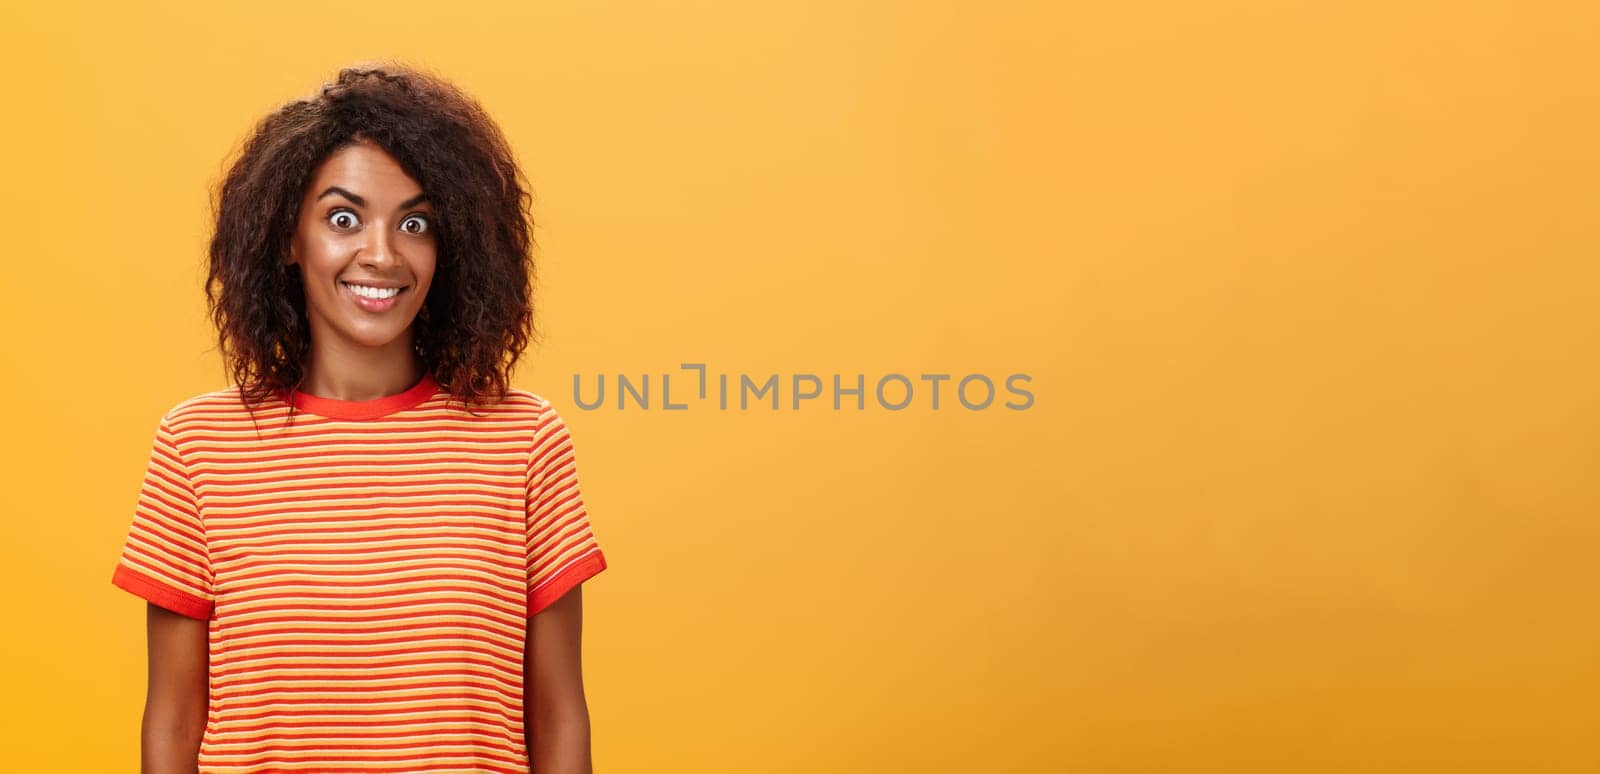 Waist-up shot of amazed and excited charming african american woman with curly hairstyle popping eyes from thrill and joy smiling broadly being surprised by great gift over orange background. Lifestyle.